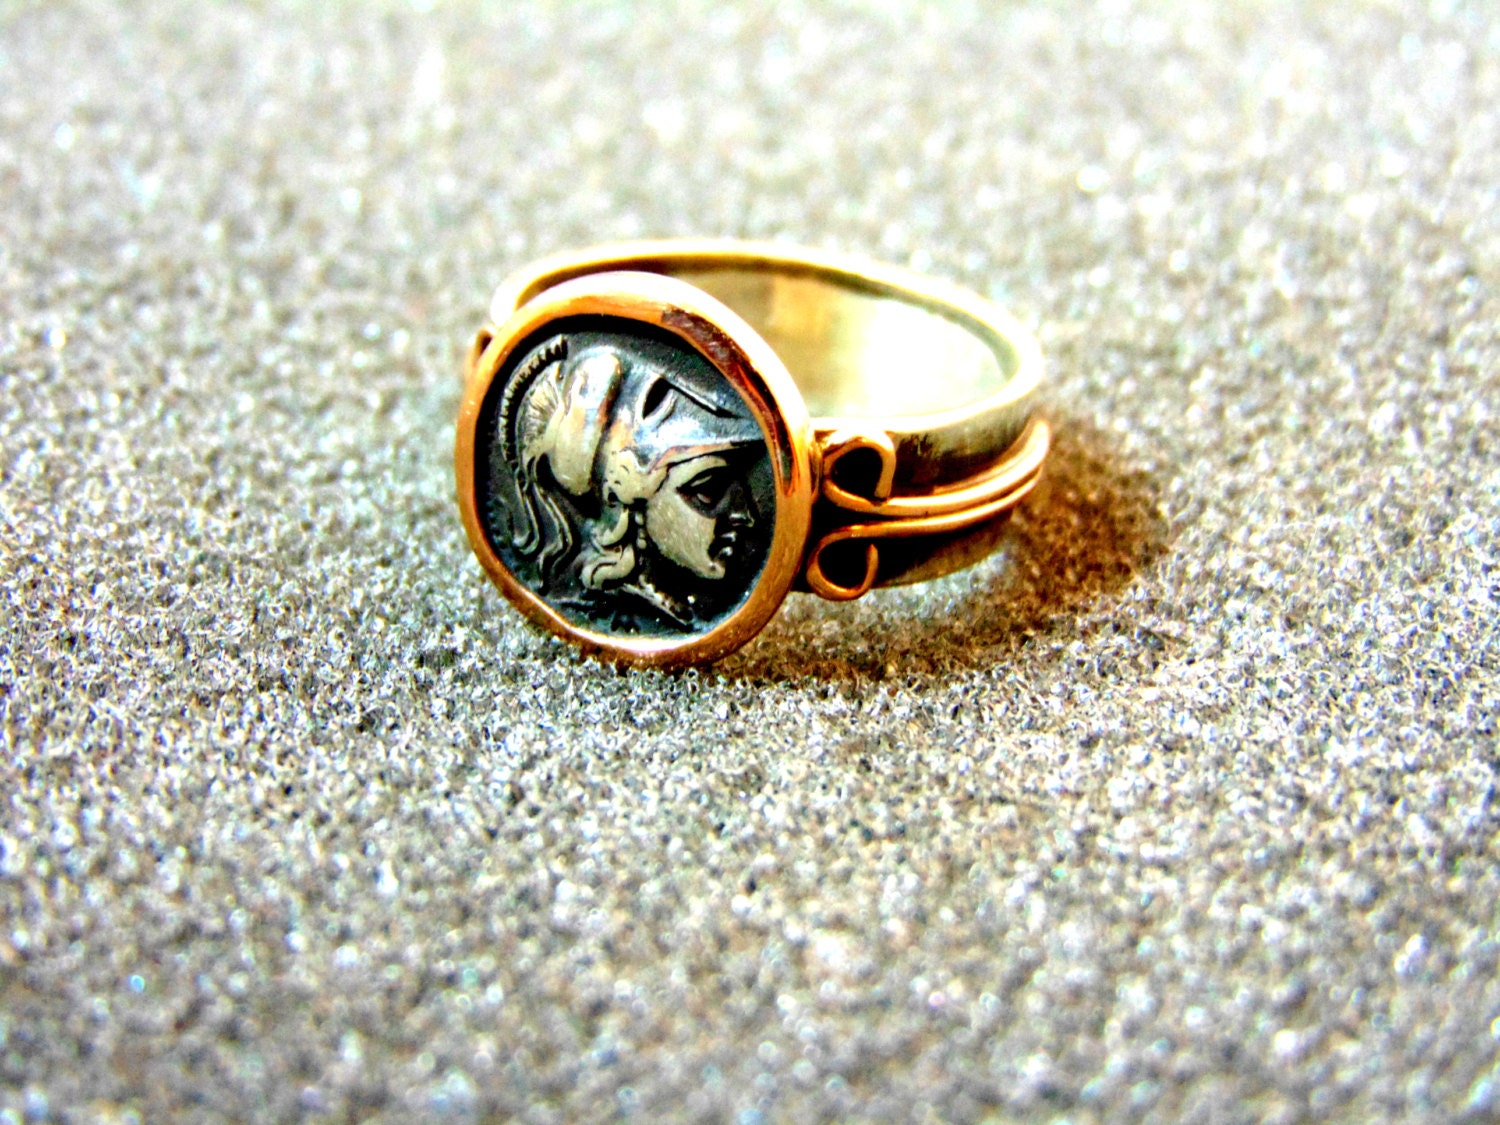 Silver and Gold Athena Ring-ancient Coin Replica - Etsy